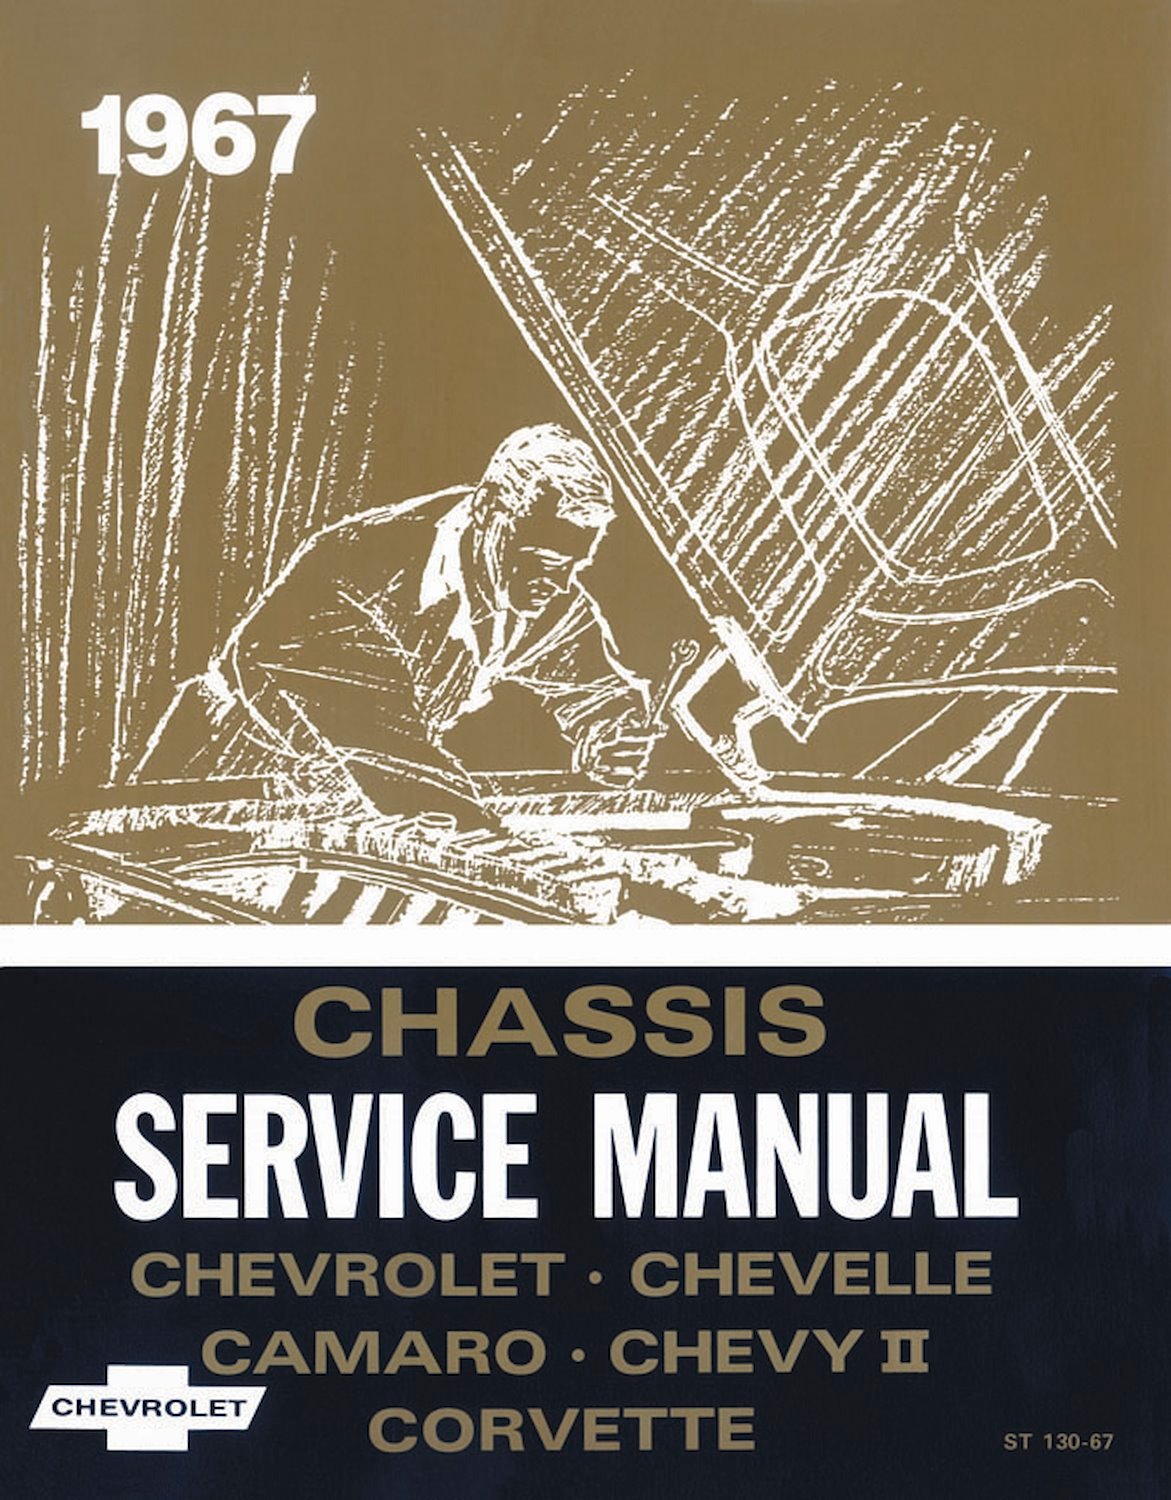 Chassis Service Manual for 1967 Chevrolet Full Size,